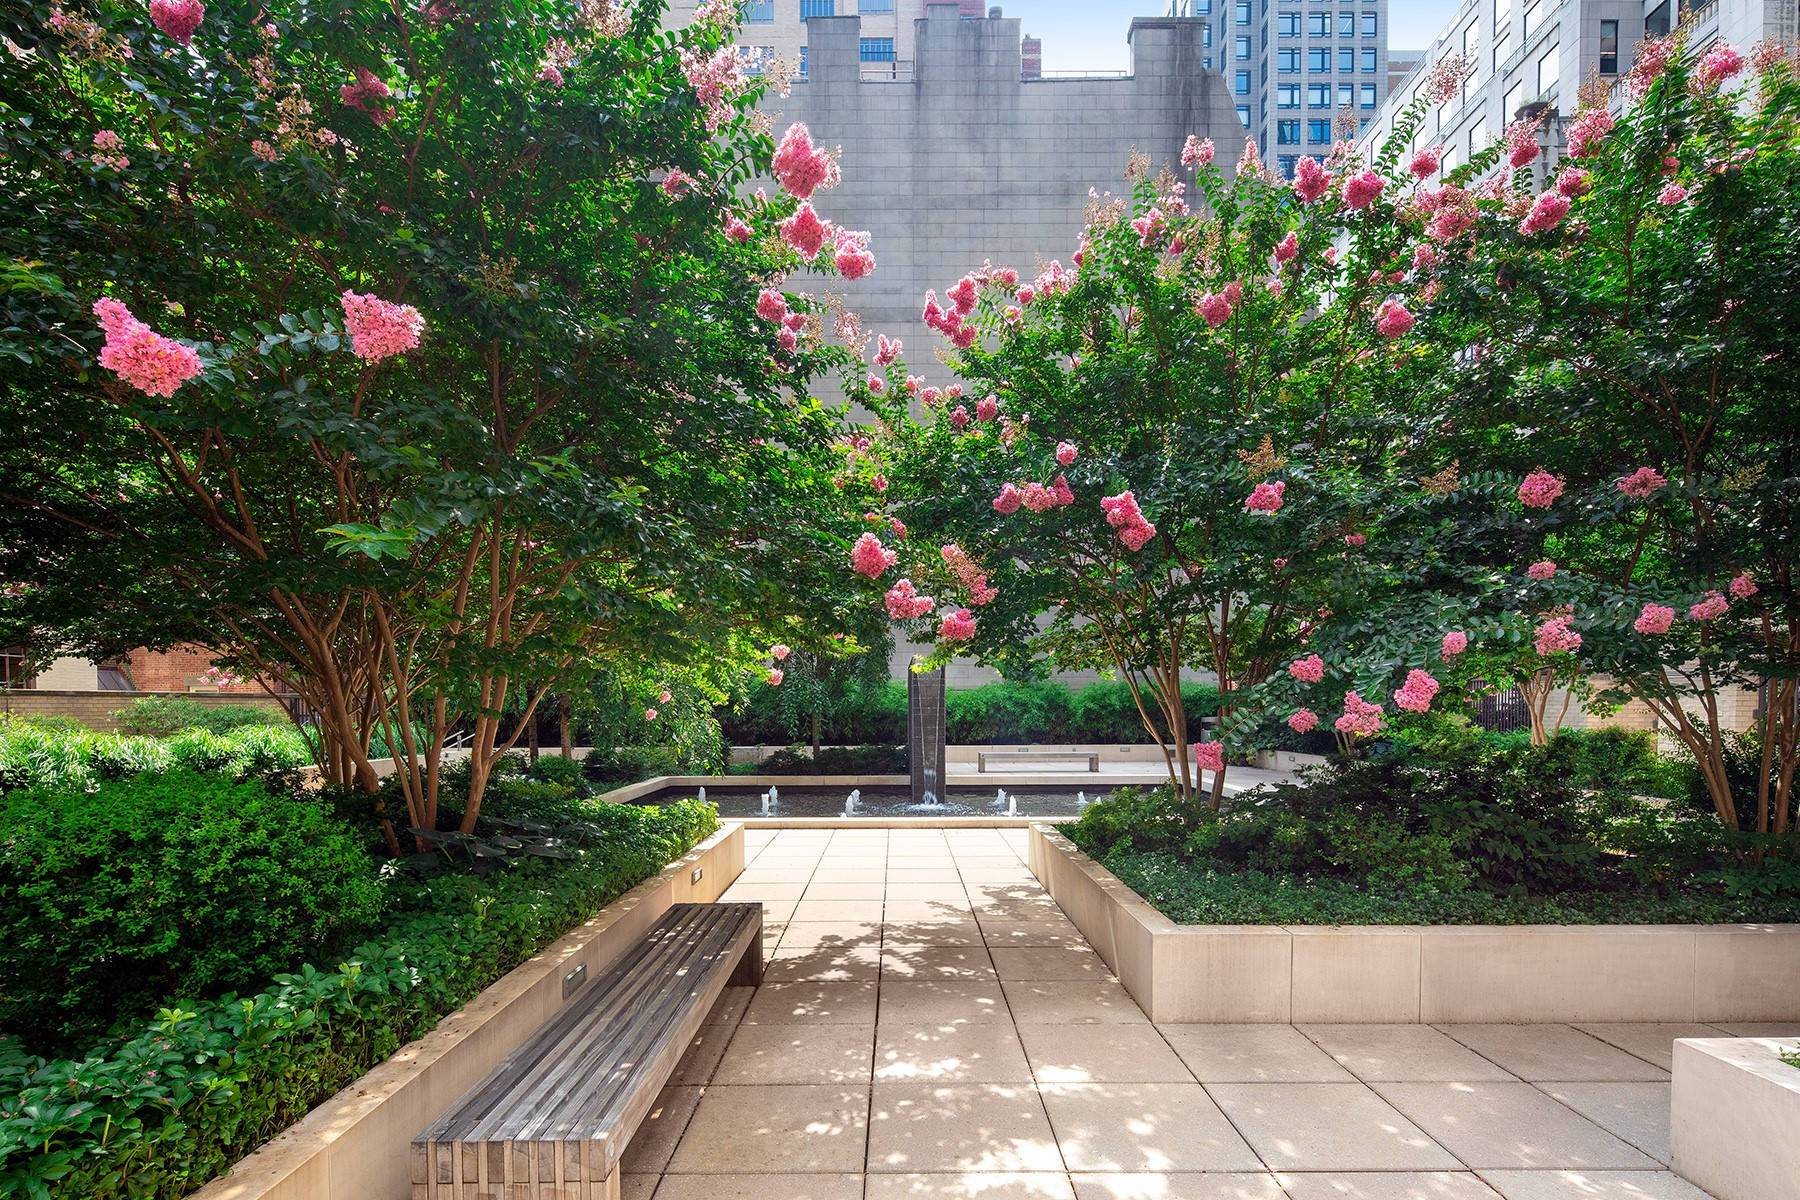 Private Landscaped Garden at 800 Fifth Avenue with trees, pink flowers, seating and a fountain